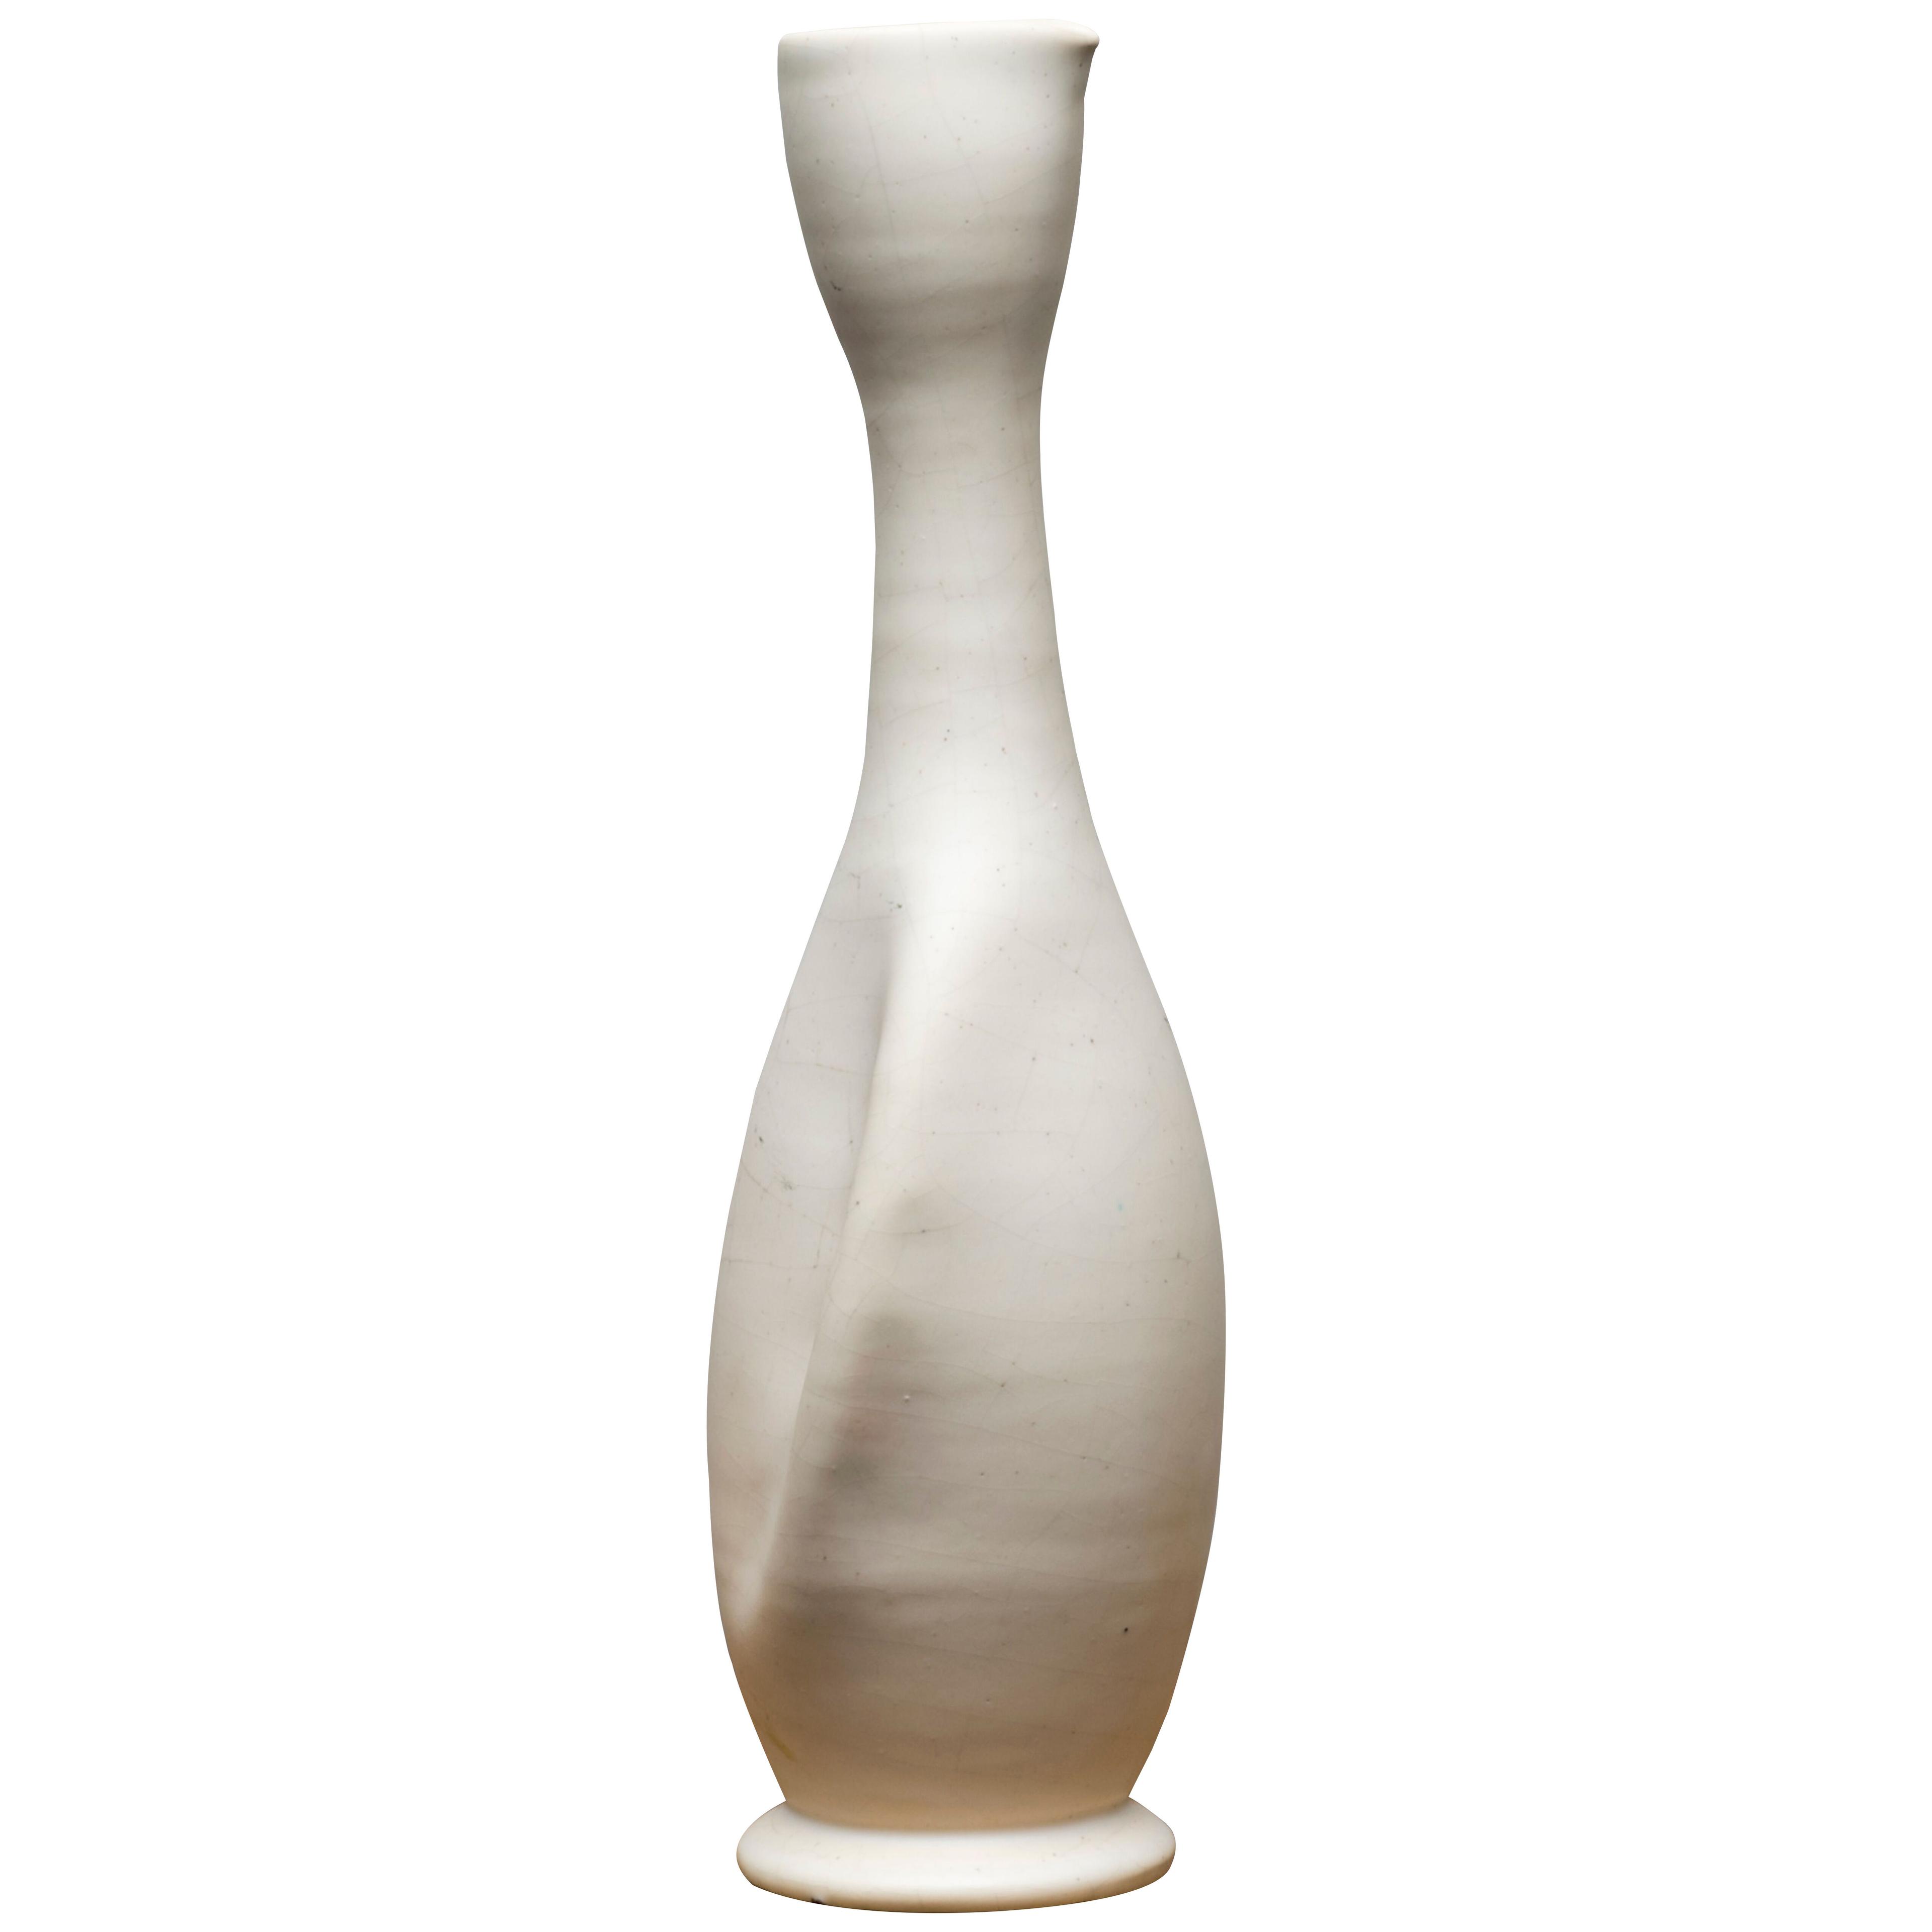 Rare vase bird by Suzanne Ramié for Madoura.